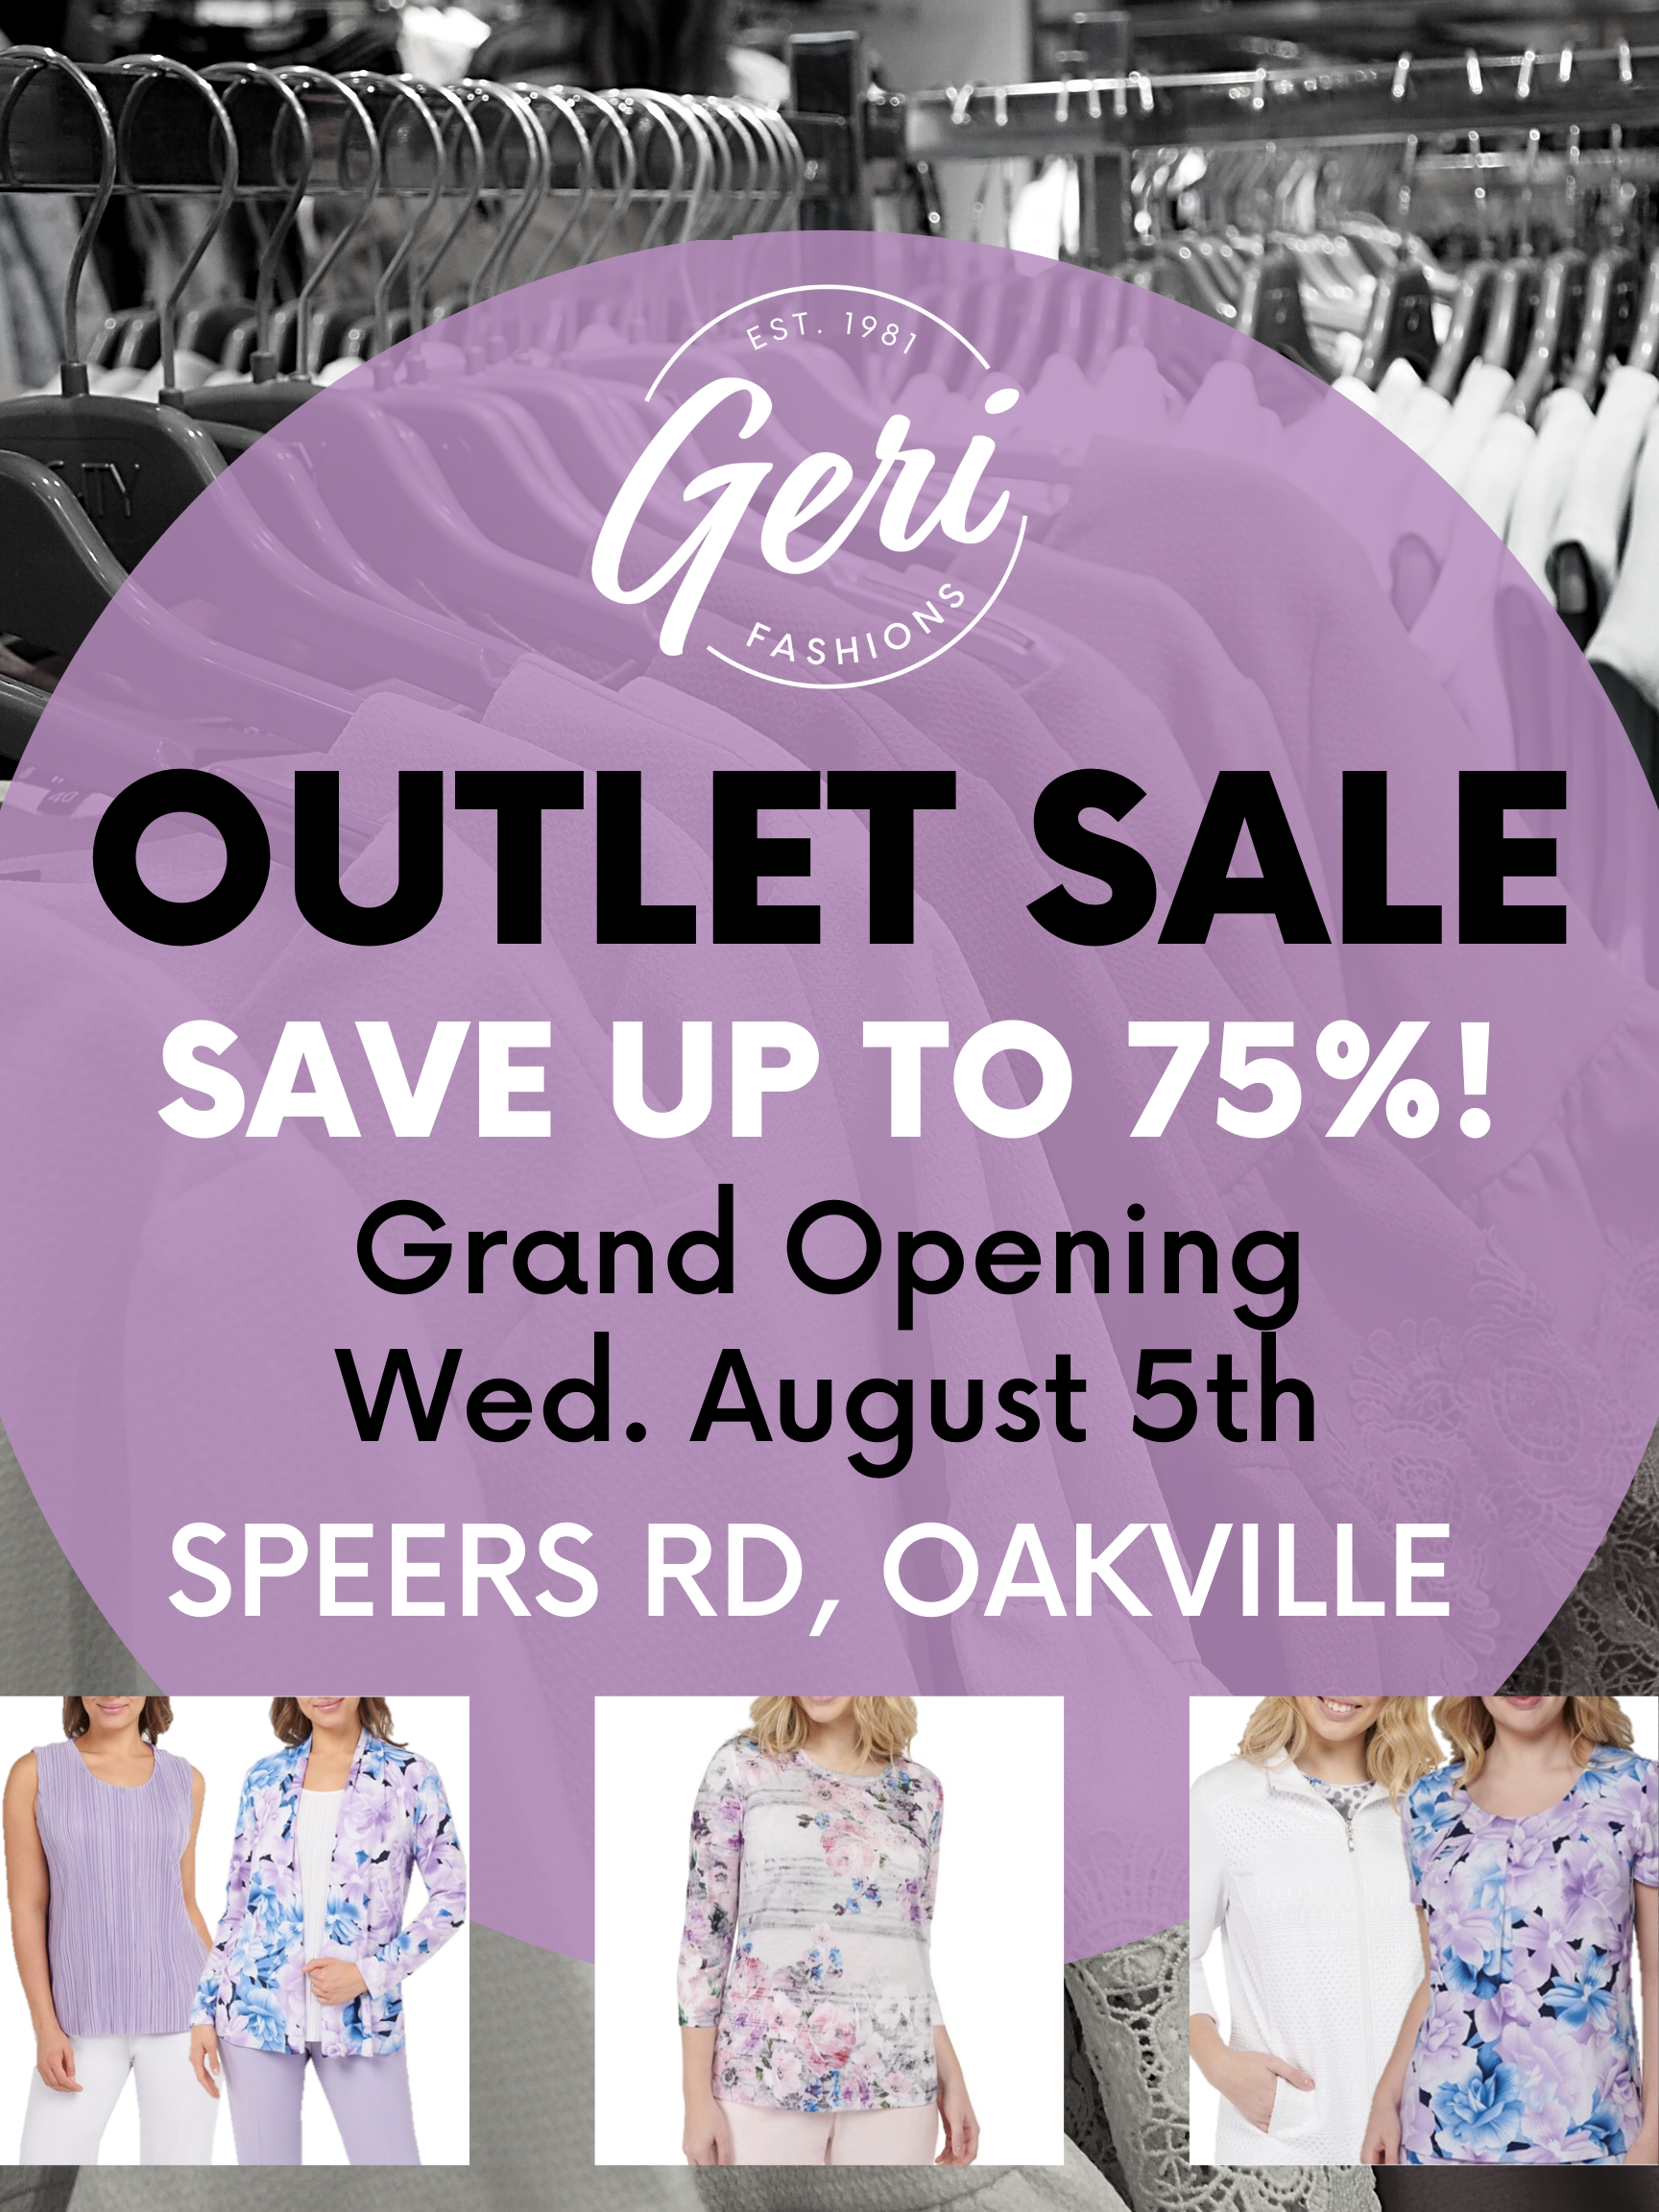 NEW! Geri Fashions Outlet Store